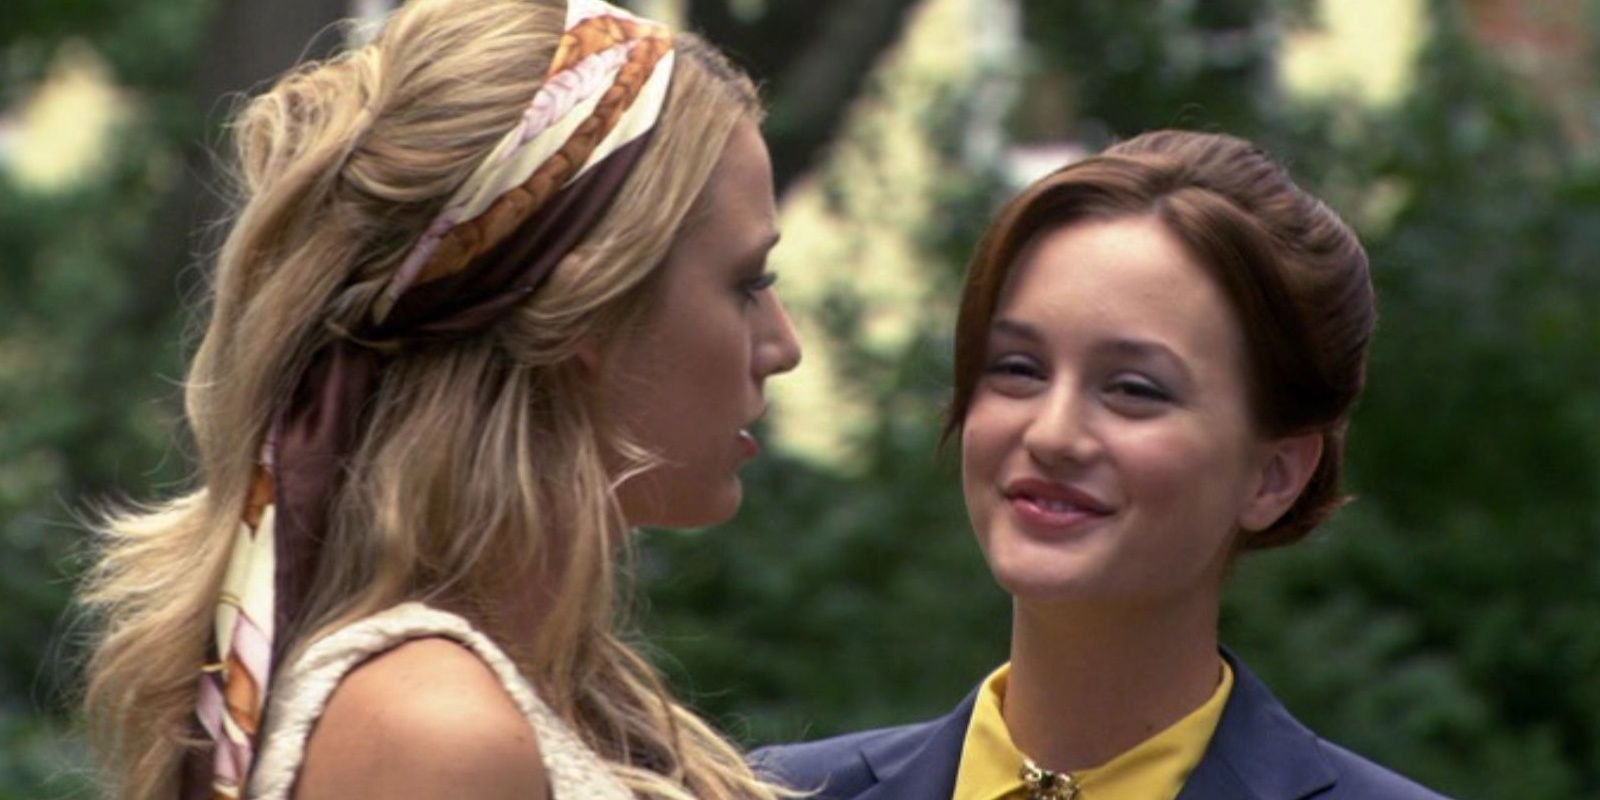 Gossip Girl 5 Times Serena And Blairs Friendship Was Toxic (And 5 Times It Was The Sweetest)